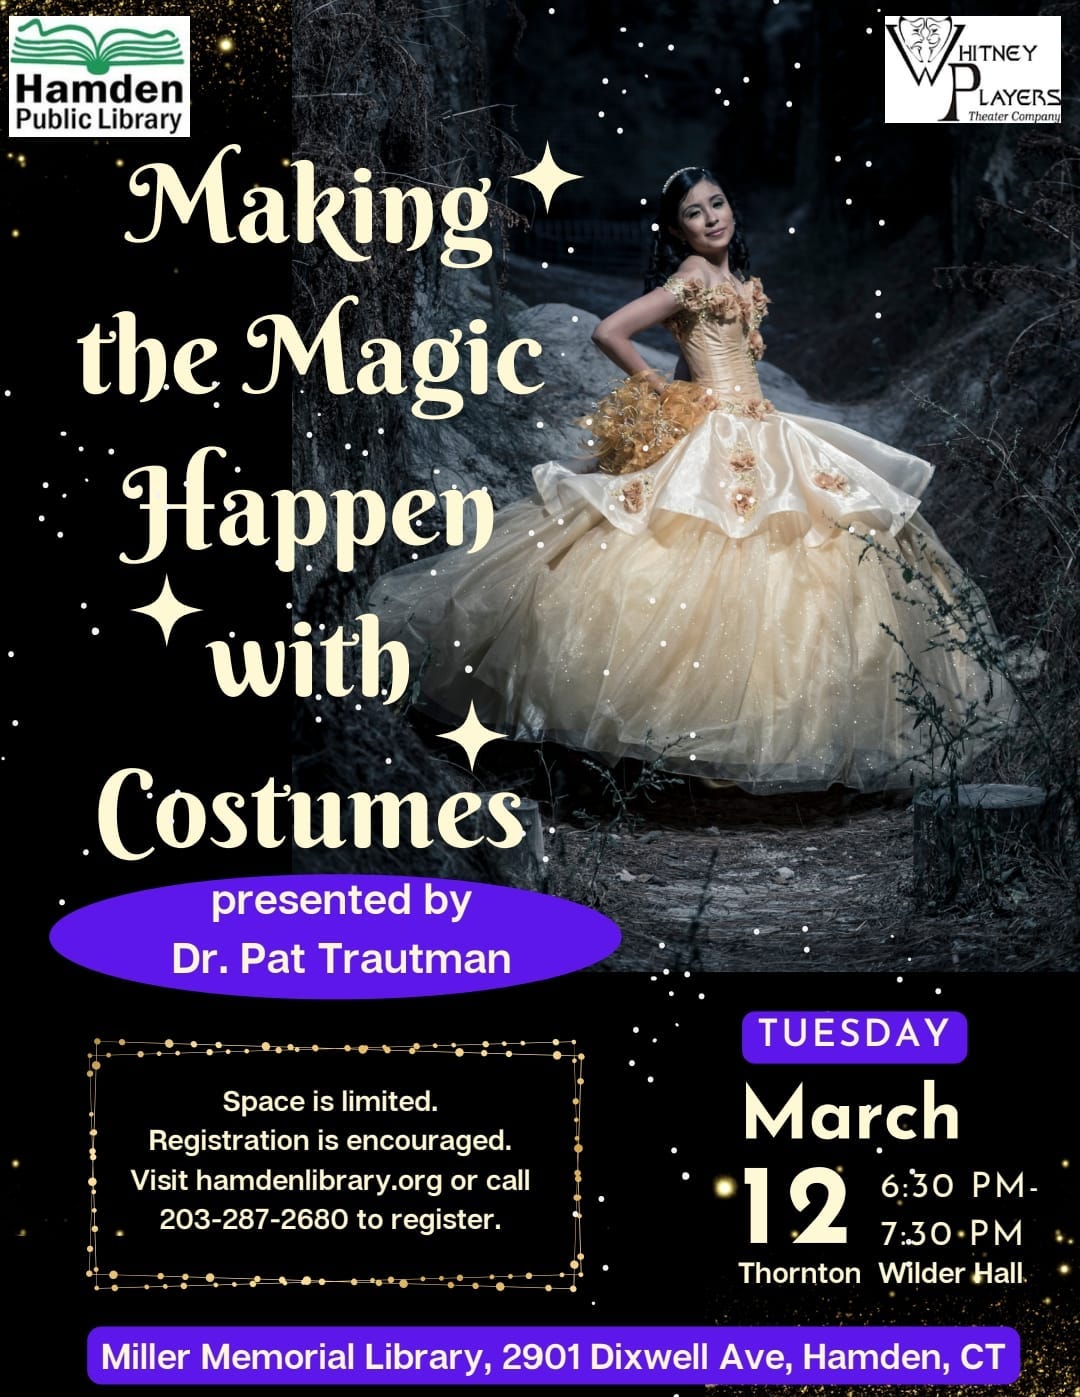 May be an image of 2 people and text that says 'HITNEY Theater F LAYERS Hamden Public Library Making the Magic Happen with Costumes presented by Dr. Pat Trautman Space is limited. Registration is encouraged. Visit hamdenlibrary.org or call 203-287-2680 to register. TUESDAY March 12 7:30 7:30PM 6:30 PM- Thornton Wilder Hall Miller Memorial Library, 2901 Dixwell Ave, Hamden, CT'